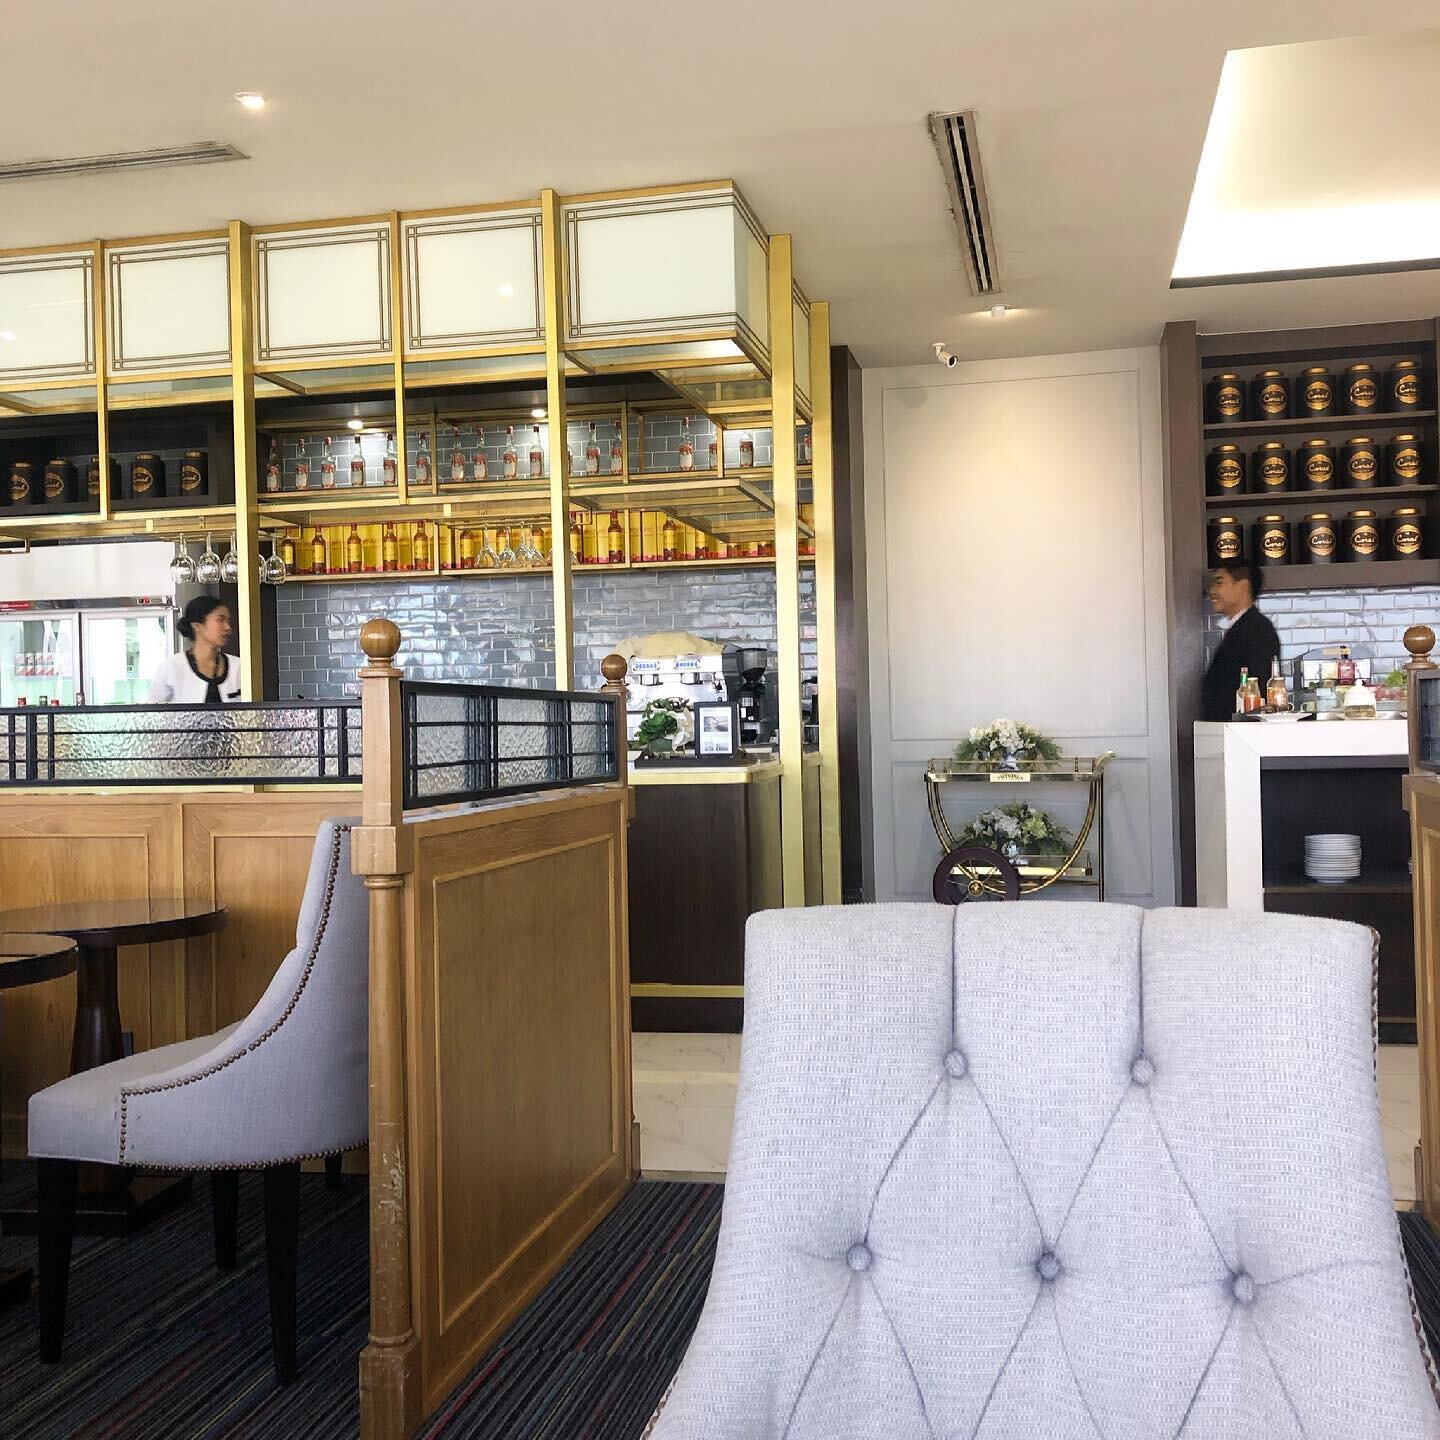 Airport Lounges on a Coach Budget is the topic of today&rsquo;s blog post. Specifically how to make the most of your credit card benefits to enjoy lounges all over the world. We visited over 10 lounges through our year of travel and they made the fly